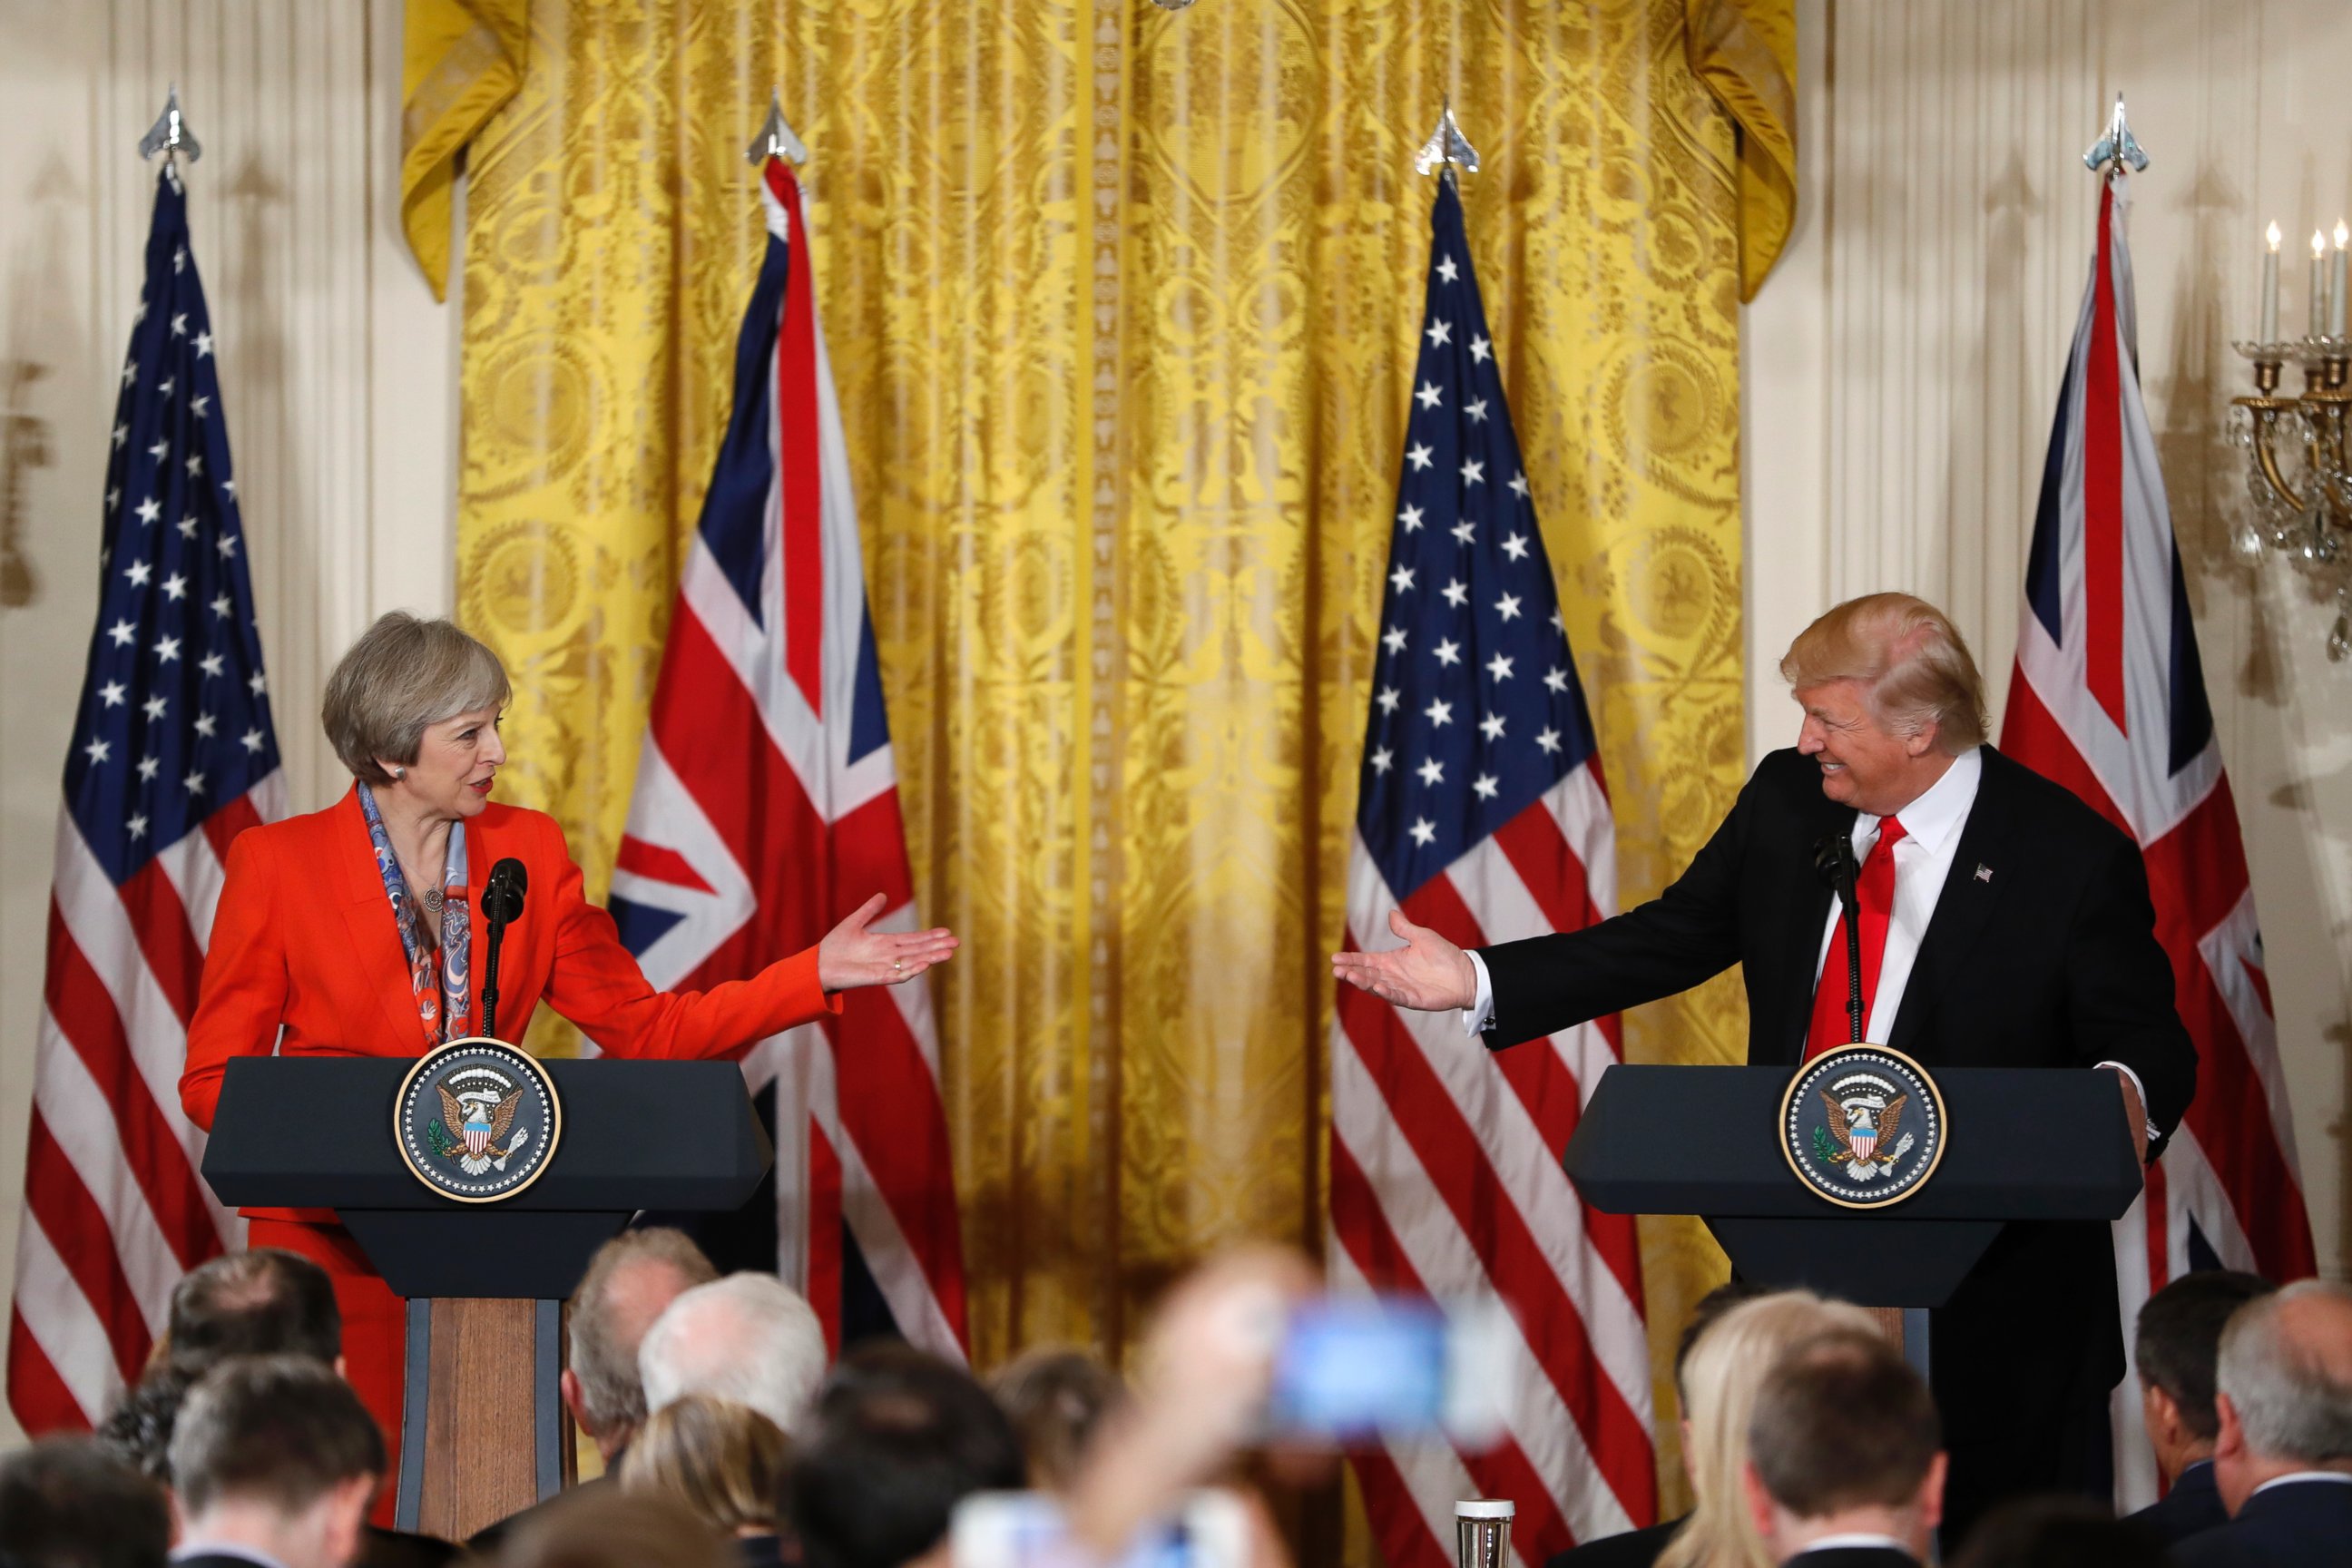 PHOTO: President Donald Trump and British Prime Minister Theresa May participate in a news conference in the East Room of the White House in Washington, Jan. 27, 2017.